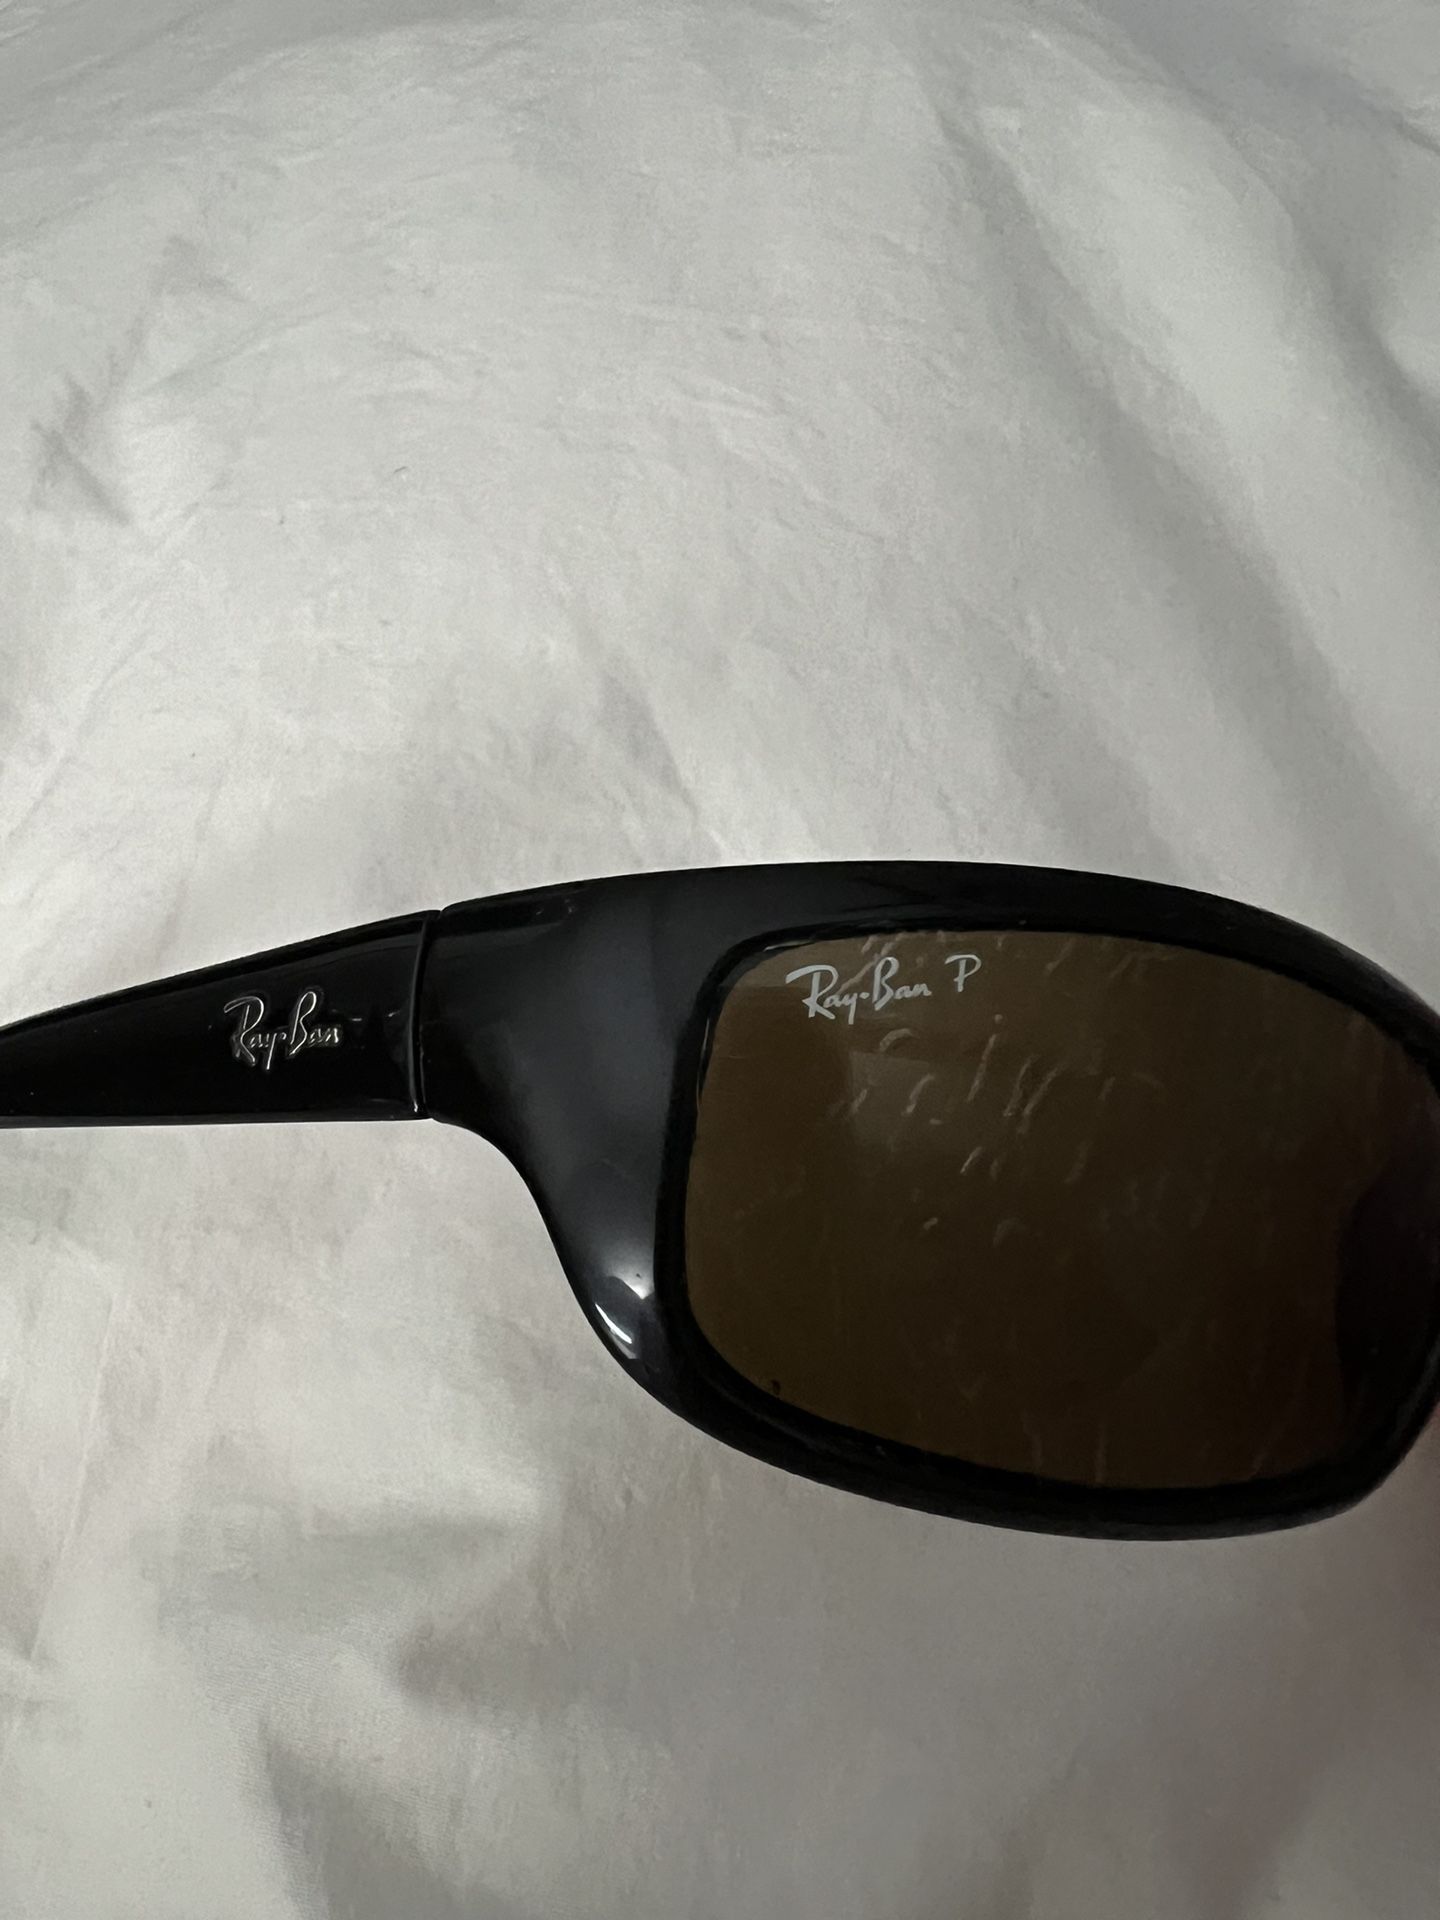 Ray Ban Sunglasses Lens Temples RAJ 1554AA  130 RC001 Black Frame Brown Lens   Black frames.  Right and left temple.  Unisex   Brown lens.  Right lens